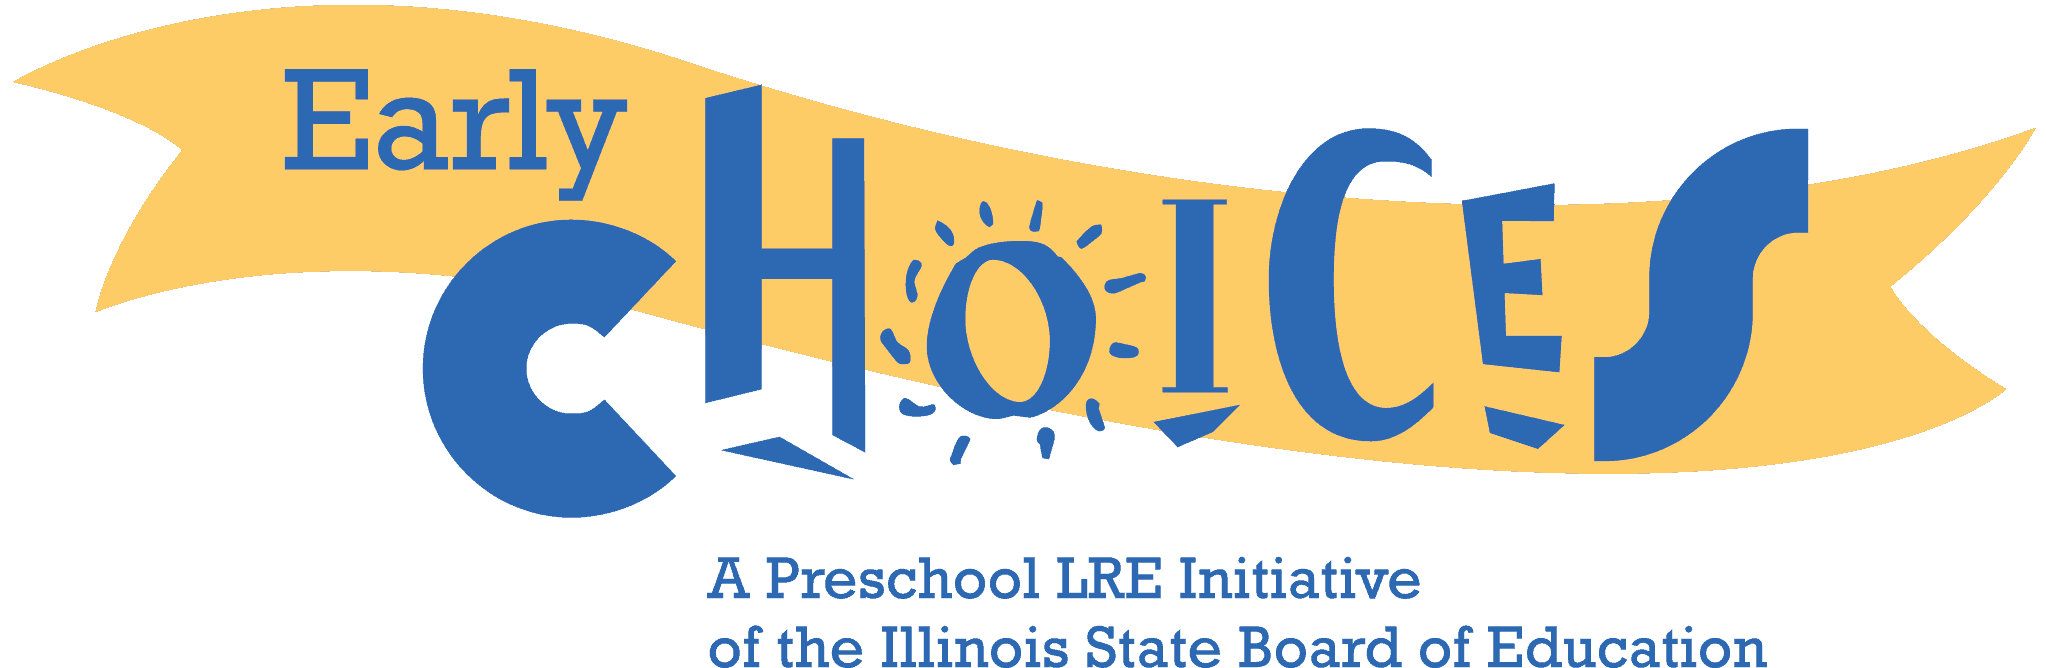 Early Choices—A Preschool LRE Initiative of the ISBE